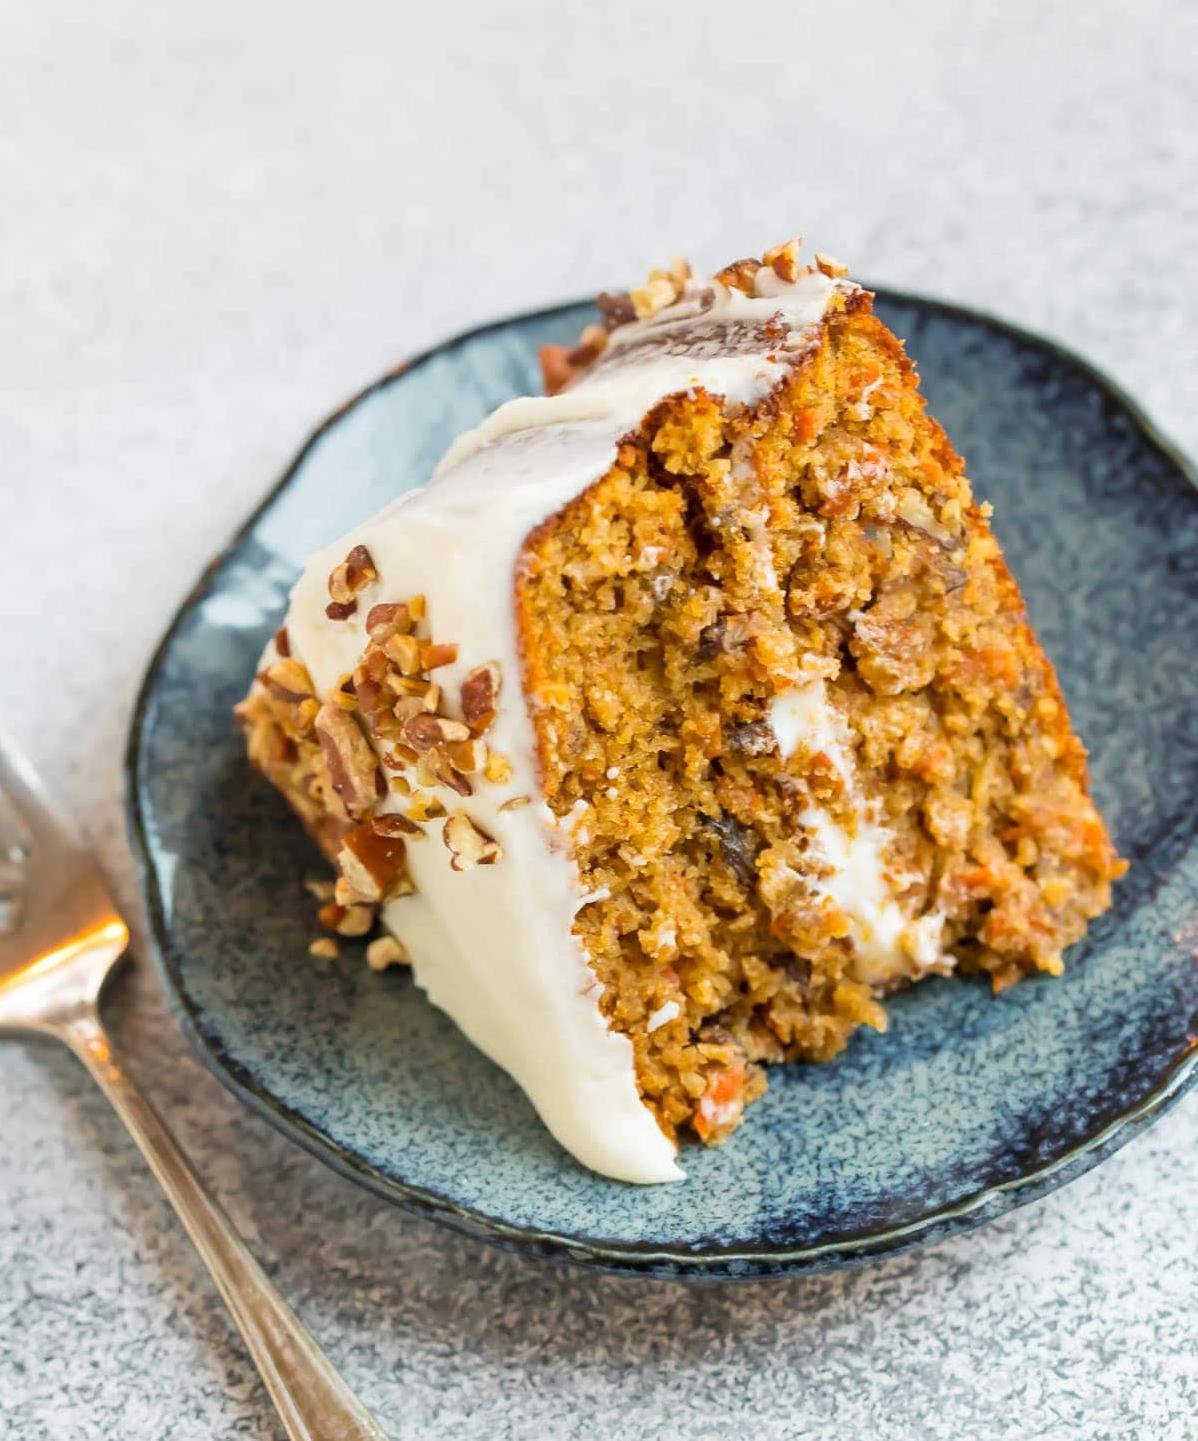  This carrot protein cake is a sweet way to sneak in some added nutrients.